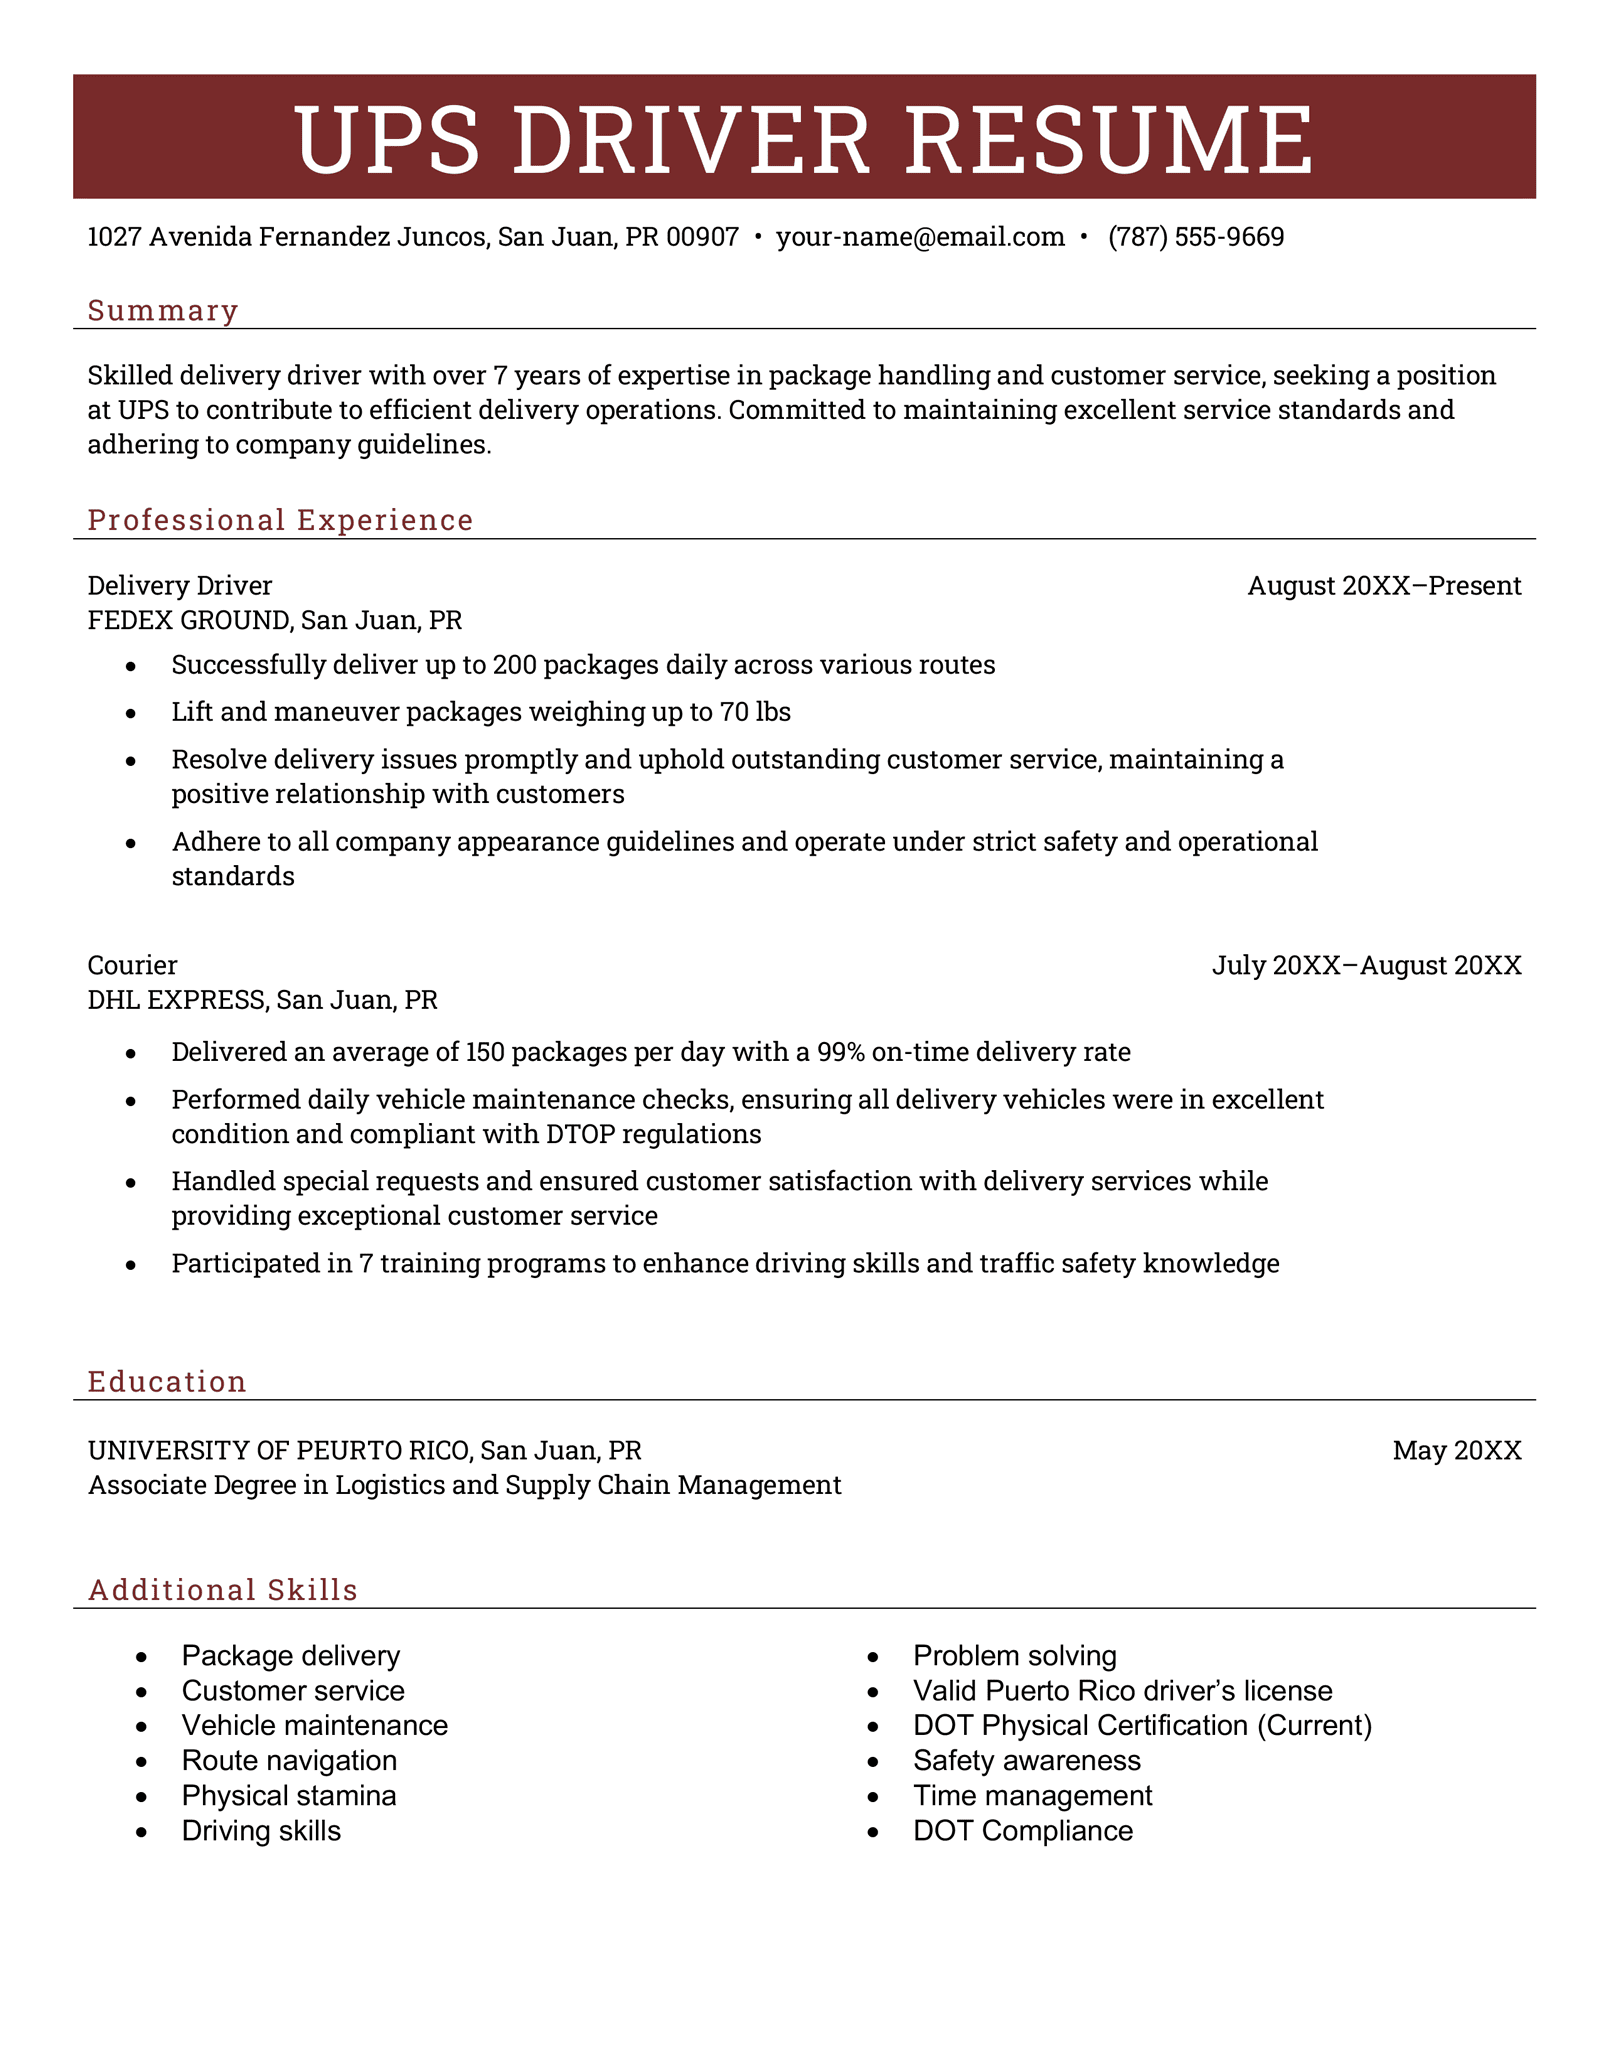 A UPS resume example that features a dark red or brown color scheme and has a long list of additional skills.